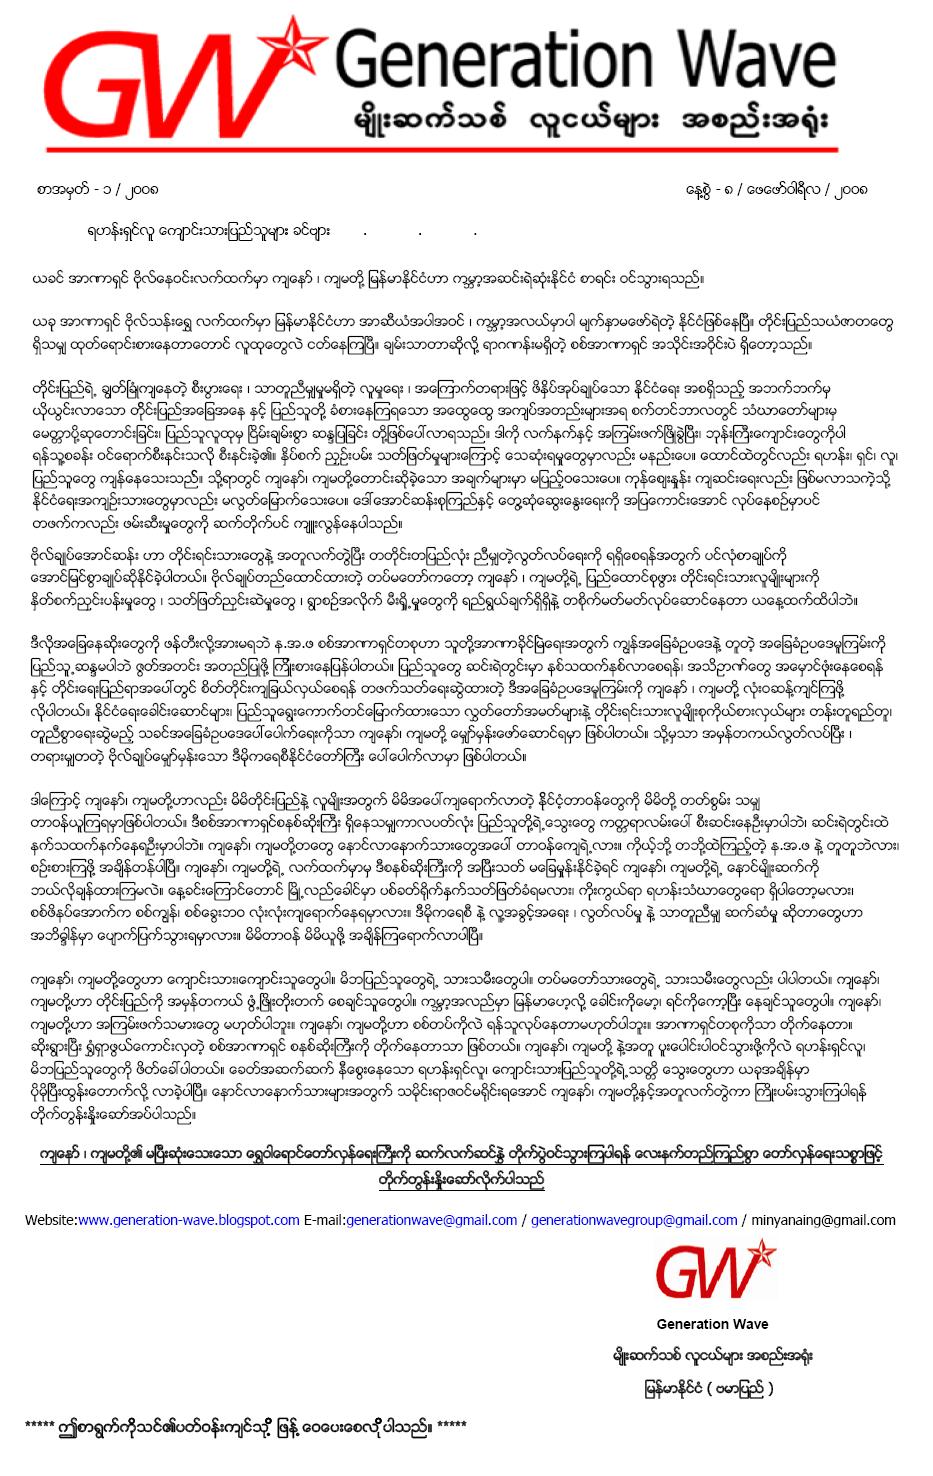 [Statement+by+Generation+Wave+to+the+people+of+Burma.jpg]